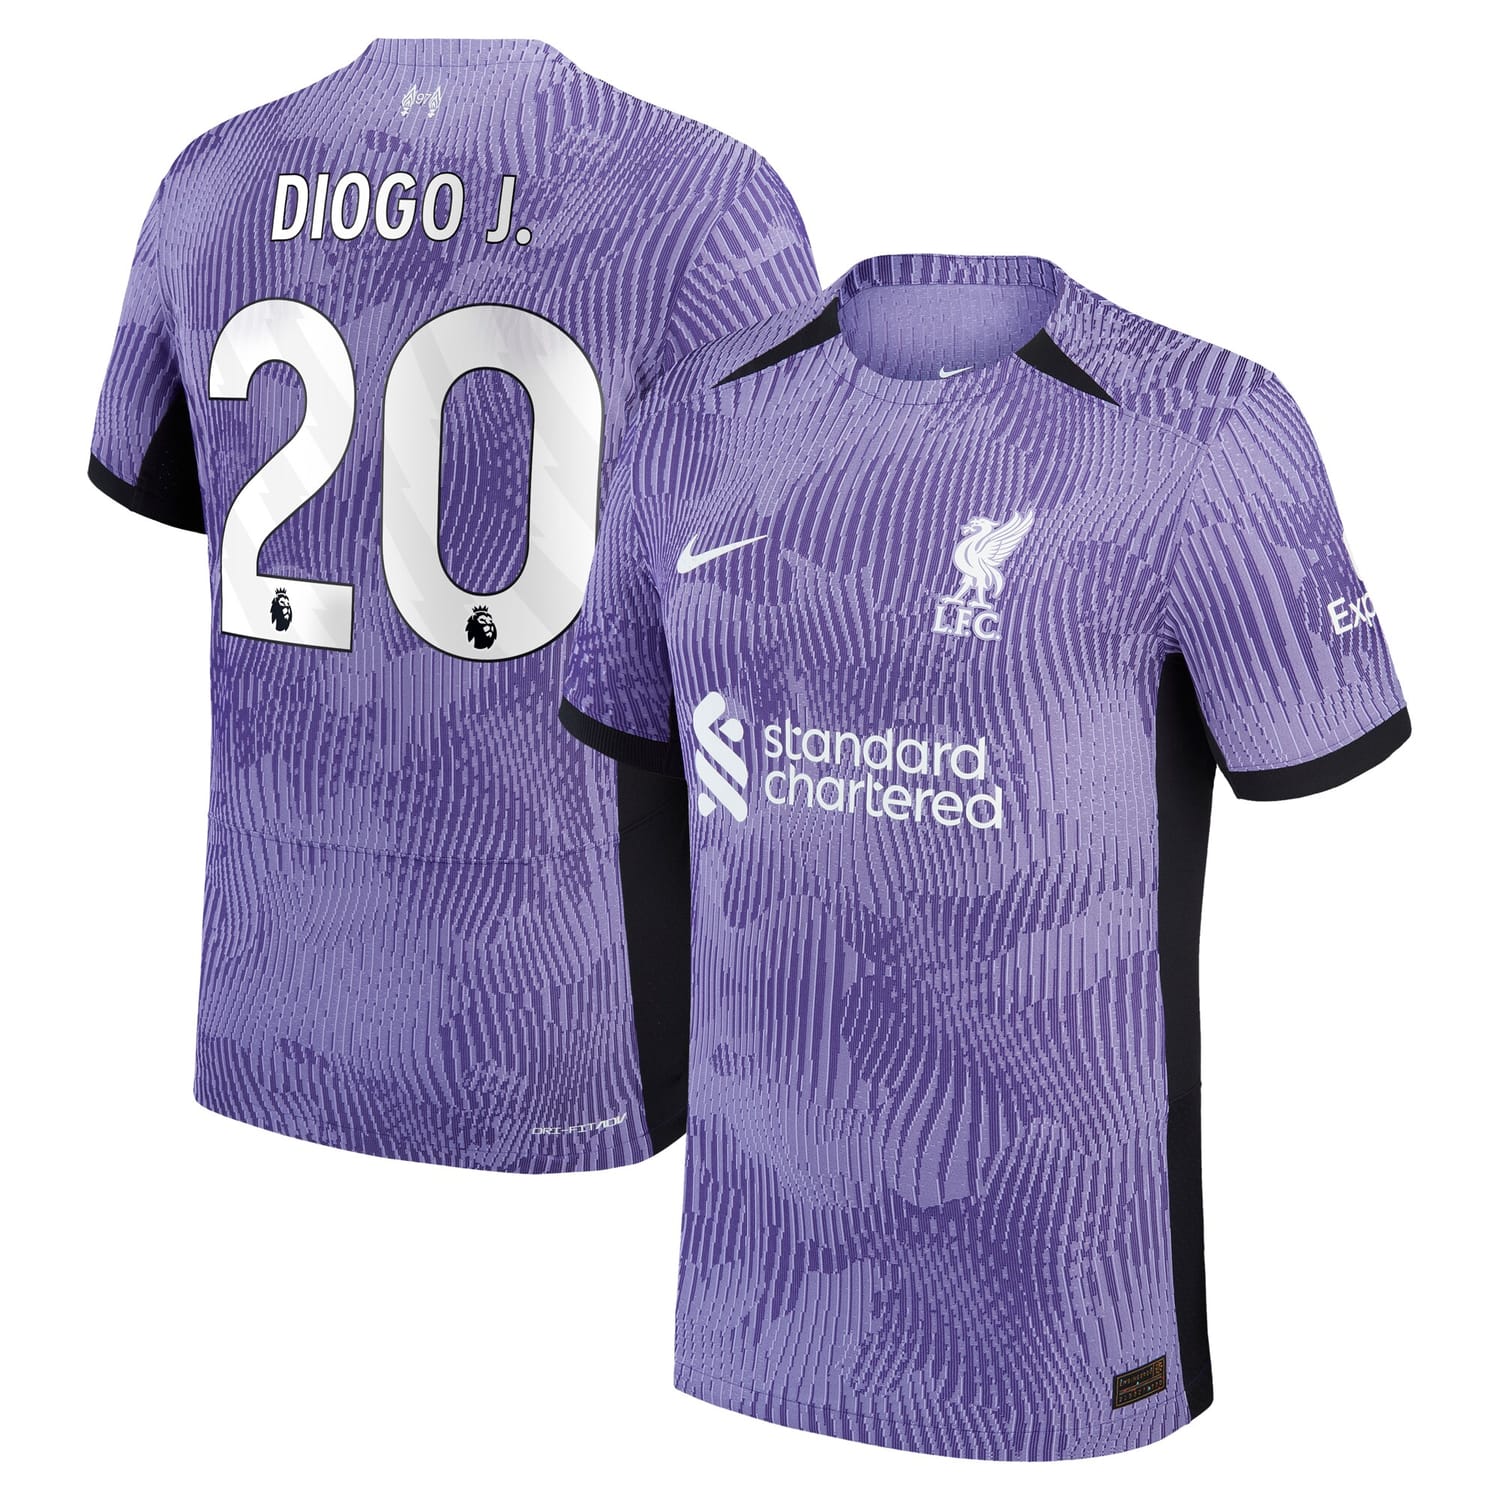 Premier League Liverpool Third Authentic Jersey Shirt 2023-24 player Diogo Jota 20 printing for Men